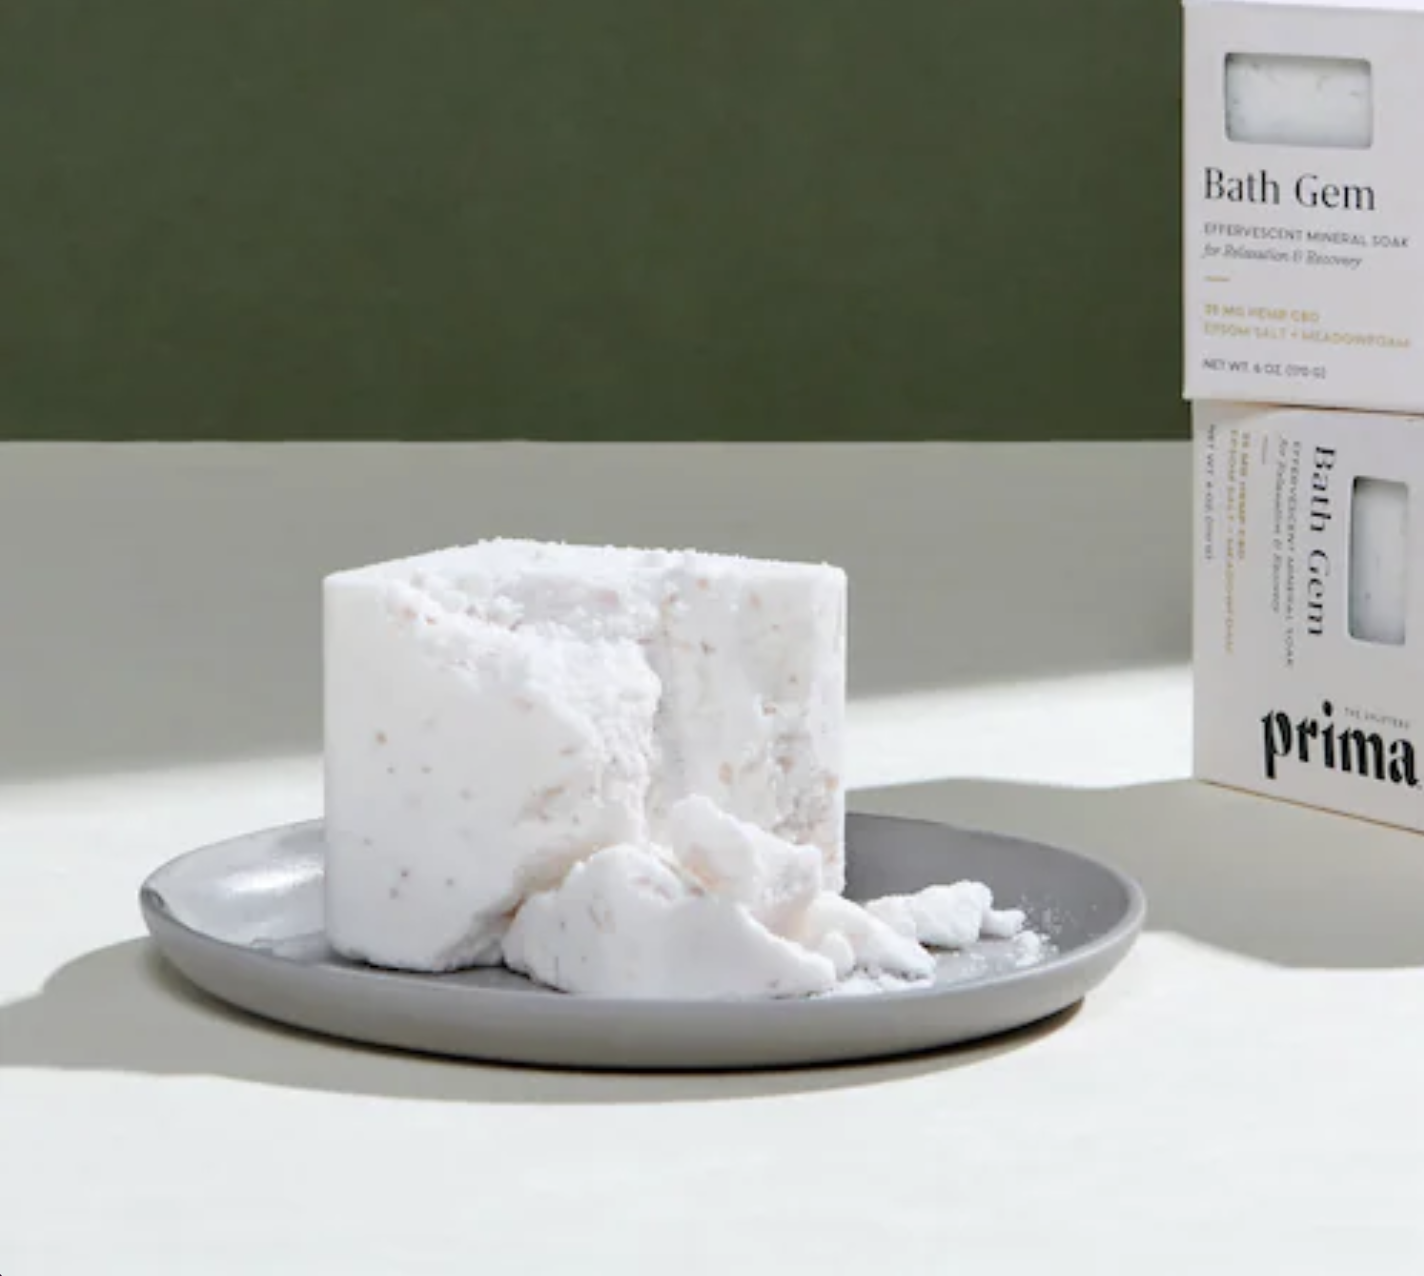 A white square-shaped bath soak slightly crumbled to show texture